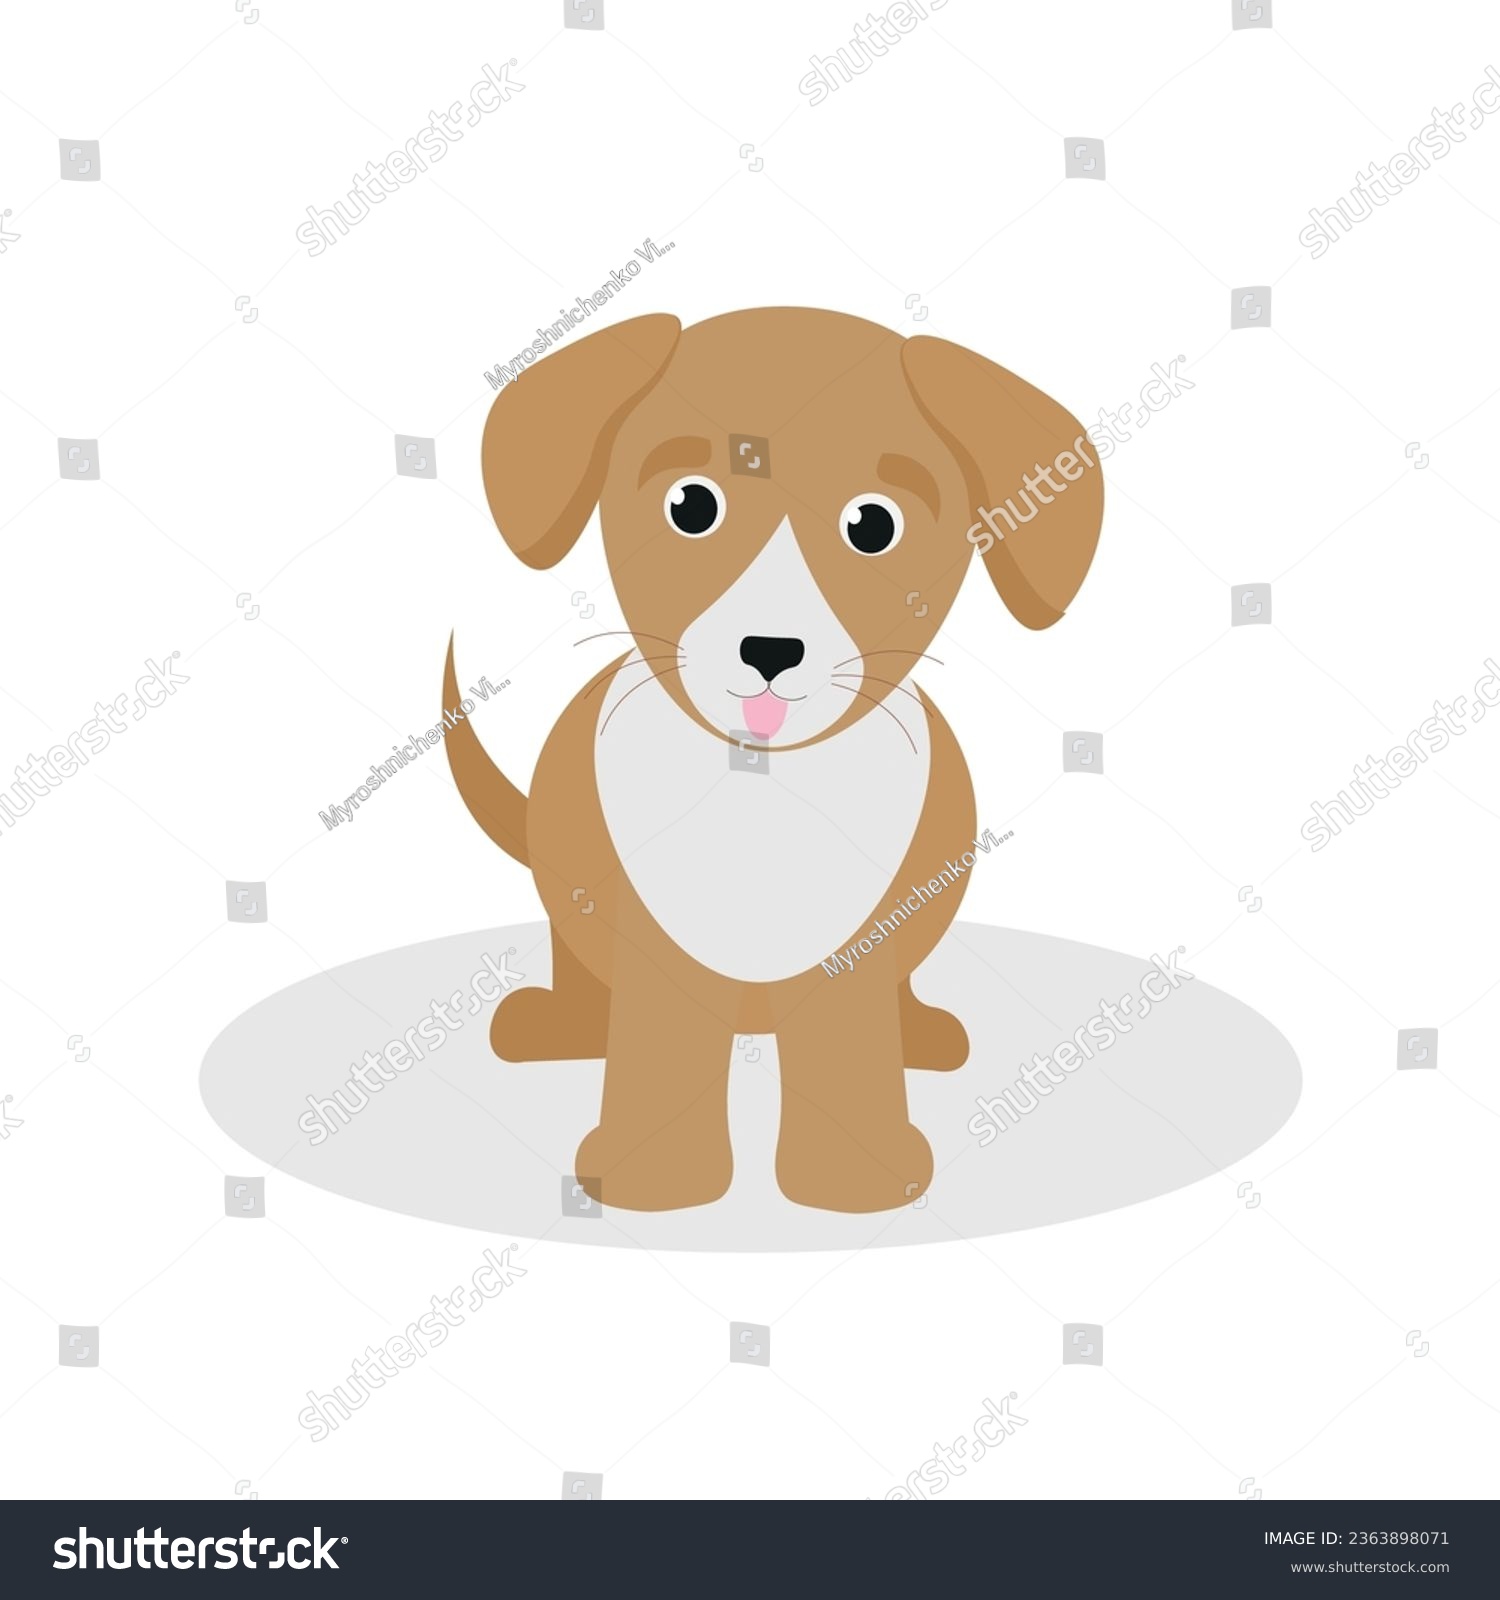 SVG of Vector dog icon. Cute puppy is sitting. Vector flat illustration. Suitable for animation, using in web, apps, books, education projects. No transparency, solid colors only. Svg, lottie without bags. svg